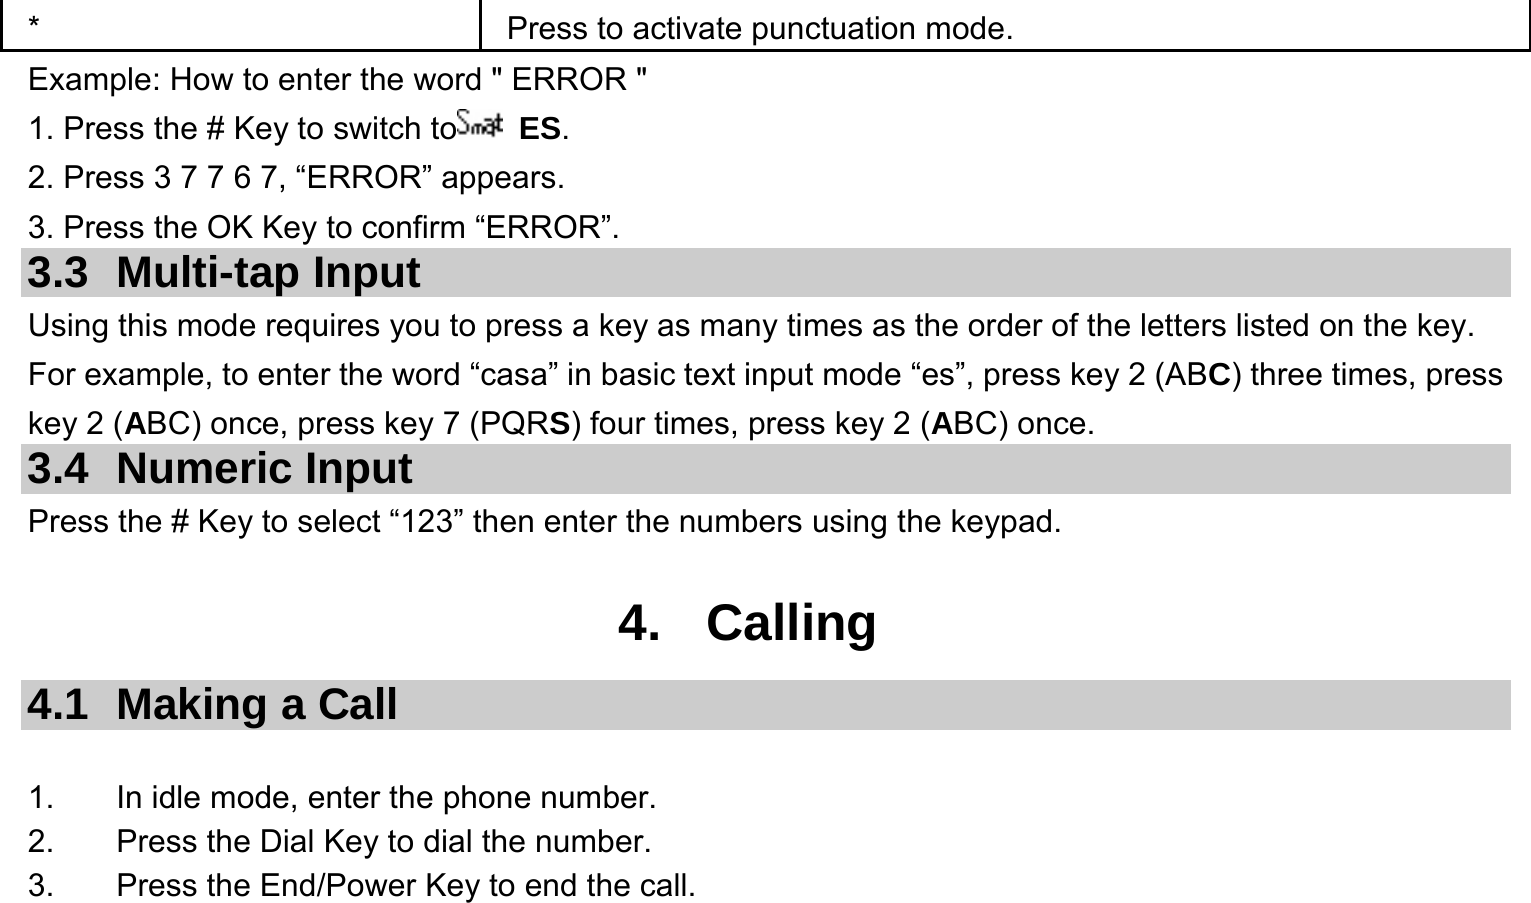  *  Press to activate punctuation mode. Example: How to enter the word &quot; ERROR &quot; 1. Press the # Key to switch to  ES. 2. Press 3 7 7 6 7, “ERROR” appears. 3. Press the OK Key to confirm “ERROR”. 3.3 Multi-tap Input Using this mode requires you to press a key as many times as the order of the letters listed on the key. For example, to enter the word “casa” in basic text input mode “es”, press key 2 (ABC) three times, press key 2 (ABC) once, press key 7 (PQRS) four times, press key 2 (ABC) once. 3.4 Numeric Input Press the # Key to select “123” then enter the numbers using the keypad.    4. Calling 4.1  Making a Call  1.  In idle mode, enter the phone number. 2.  Press the Dial Key to dial the number. 3.  Press the End/Power Key to end the call. 